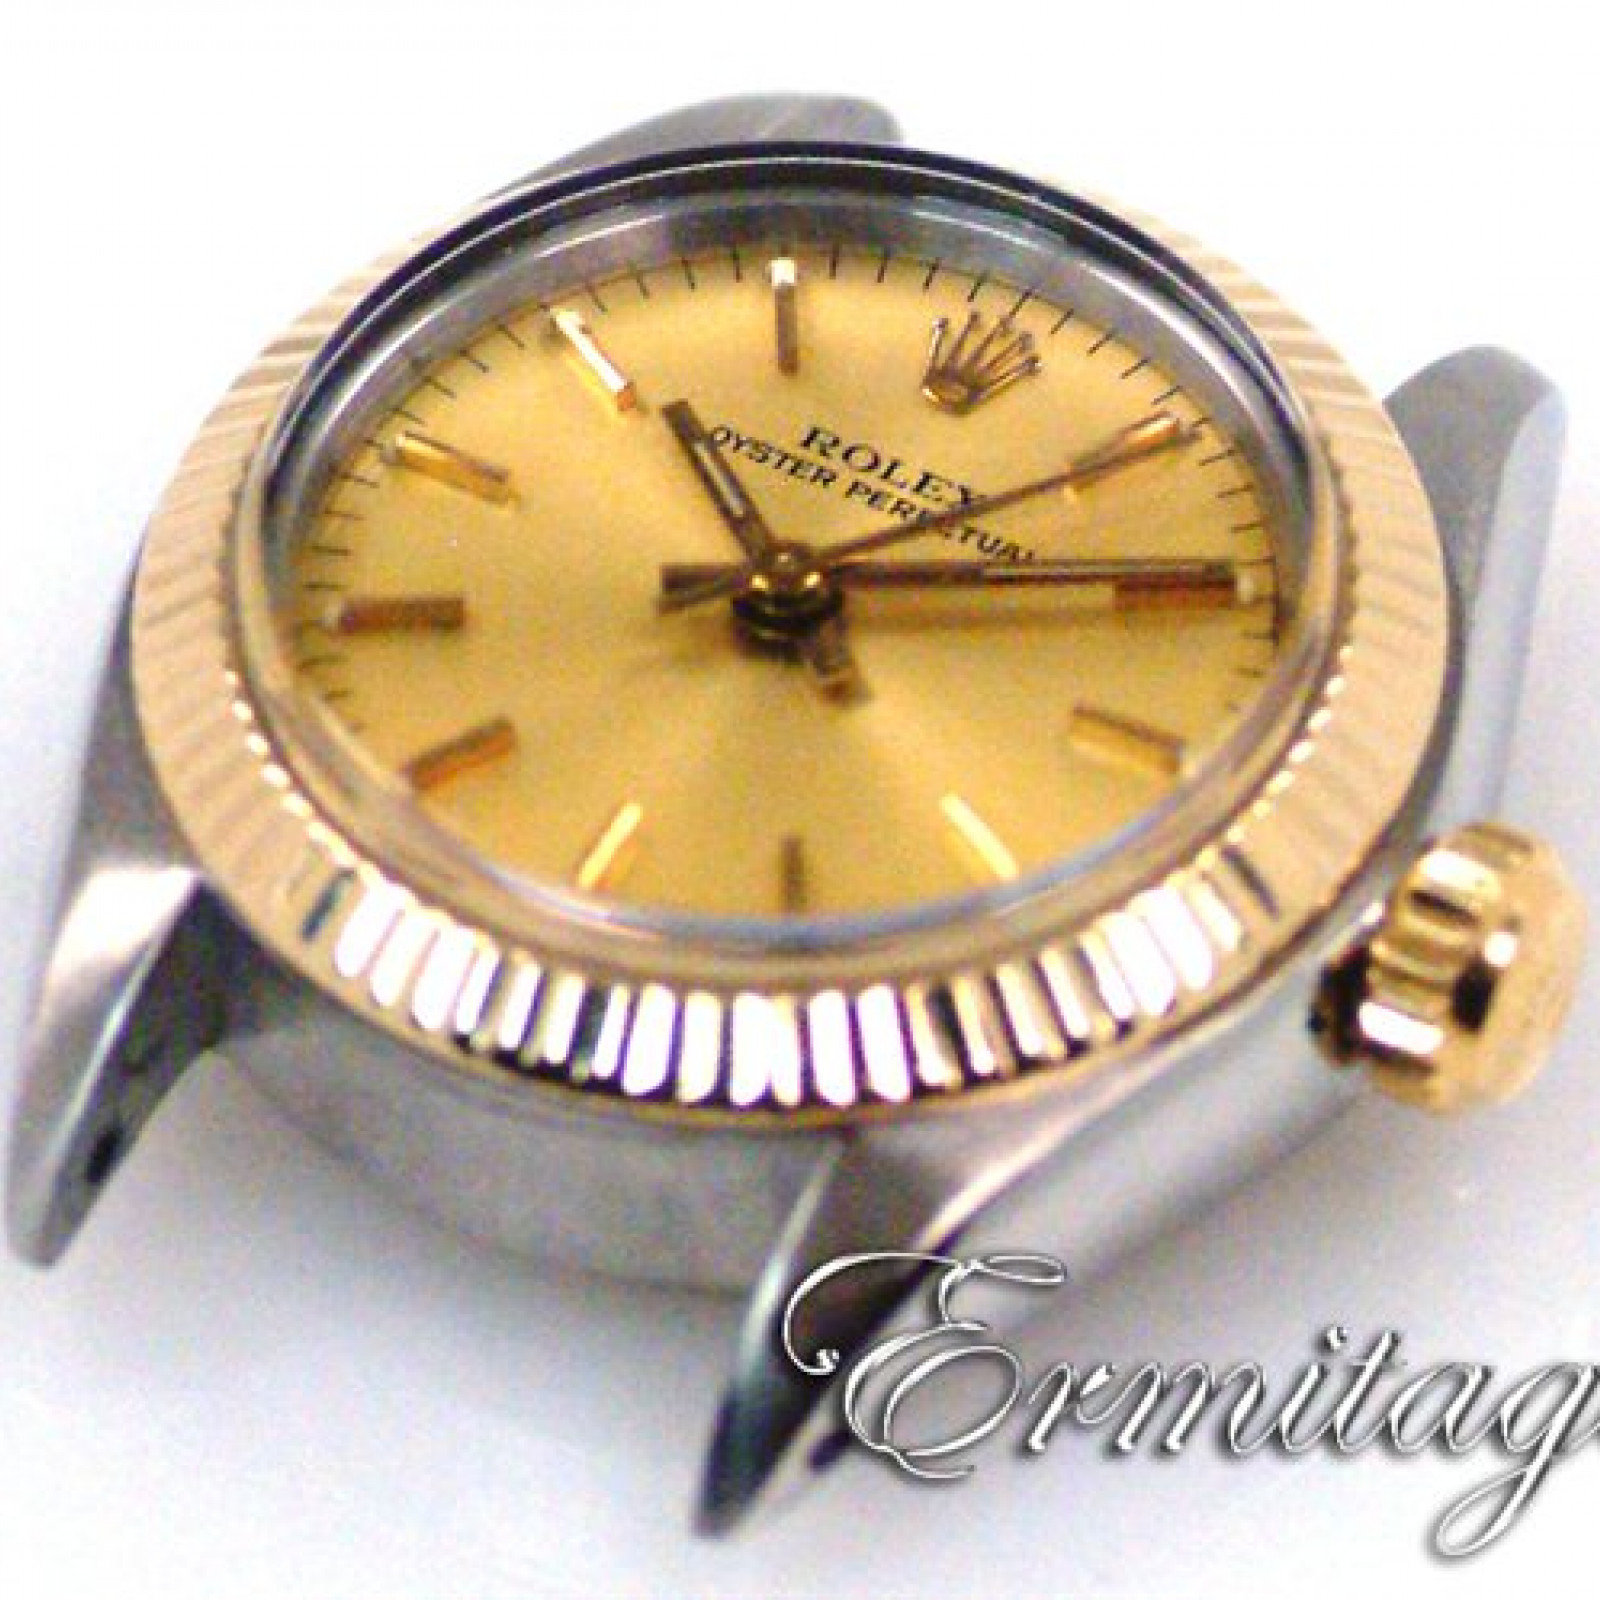 Vintage Rolex Oyster Perpetual 6719 Gold & Steel